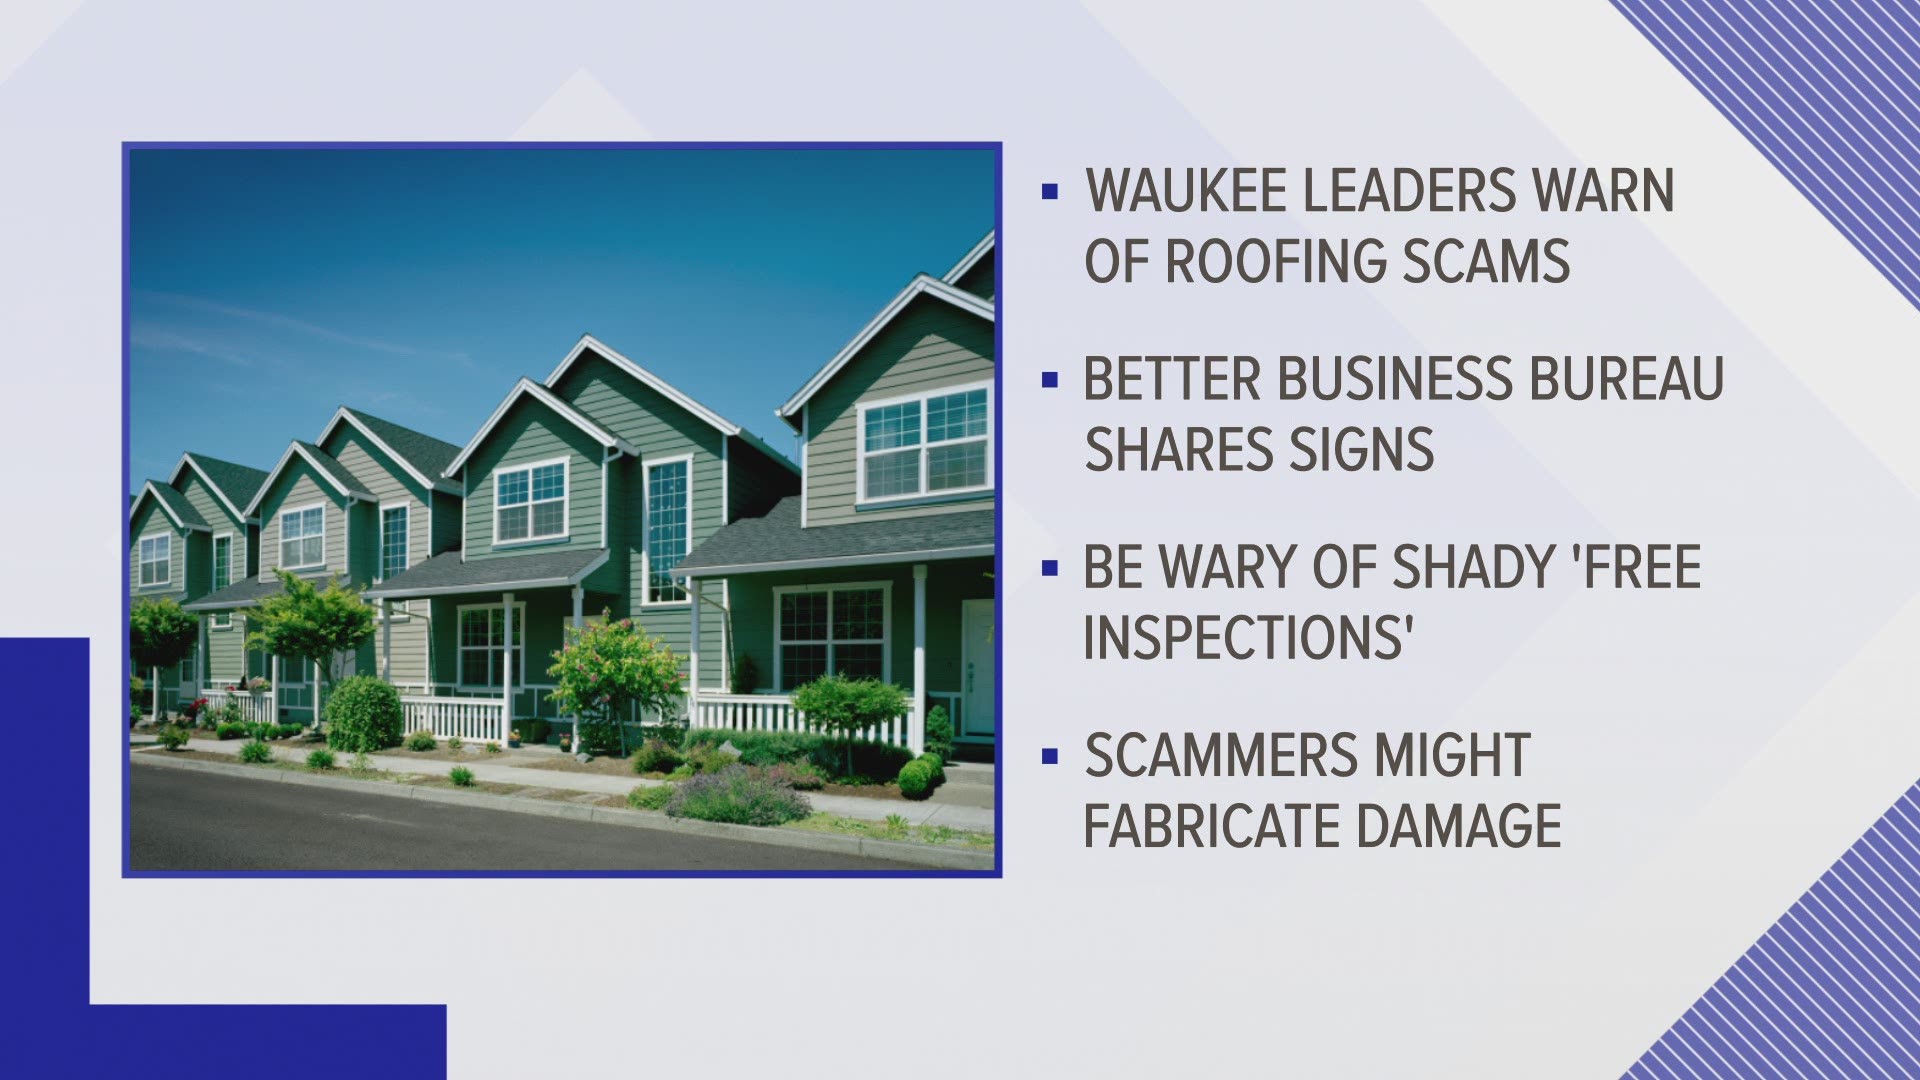 The City of Waukee says many residents have reported phone calls from roof repair companies offering free inspections. Here's what the BBB wants you to look out for.